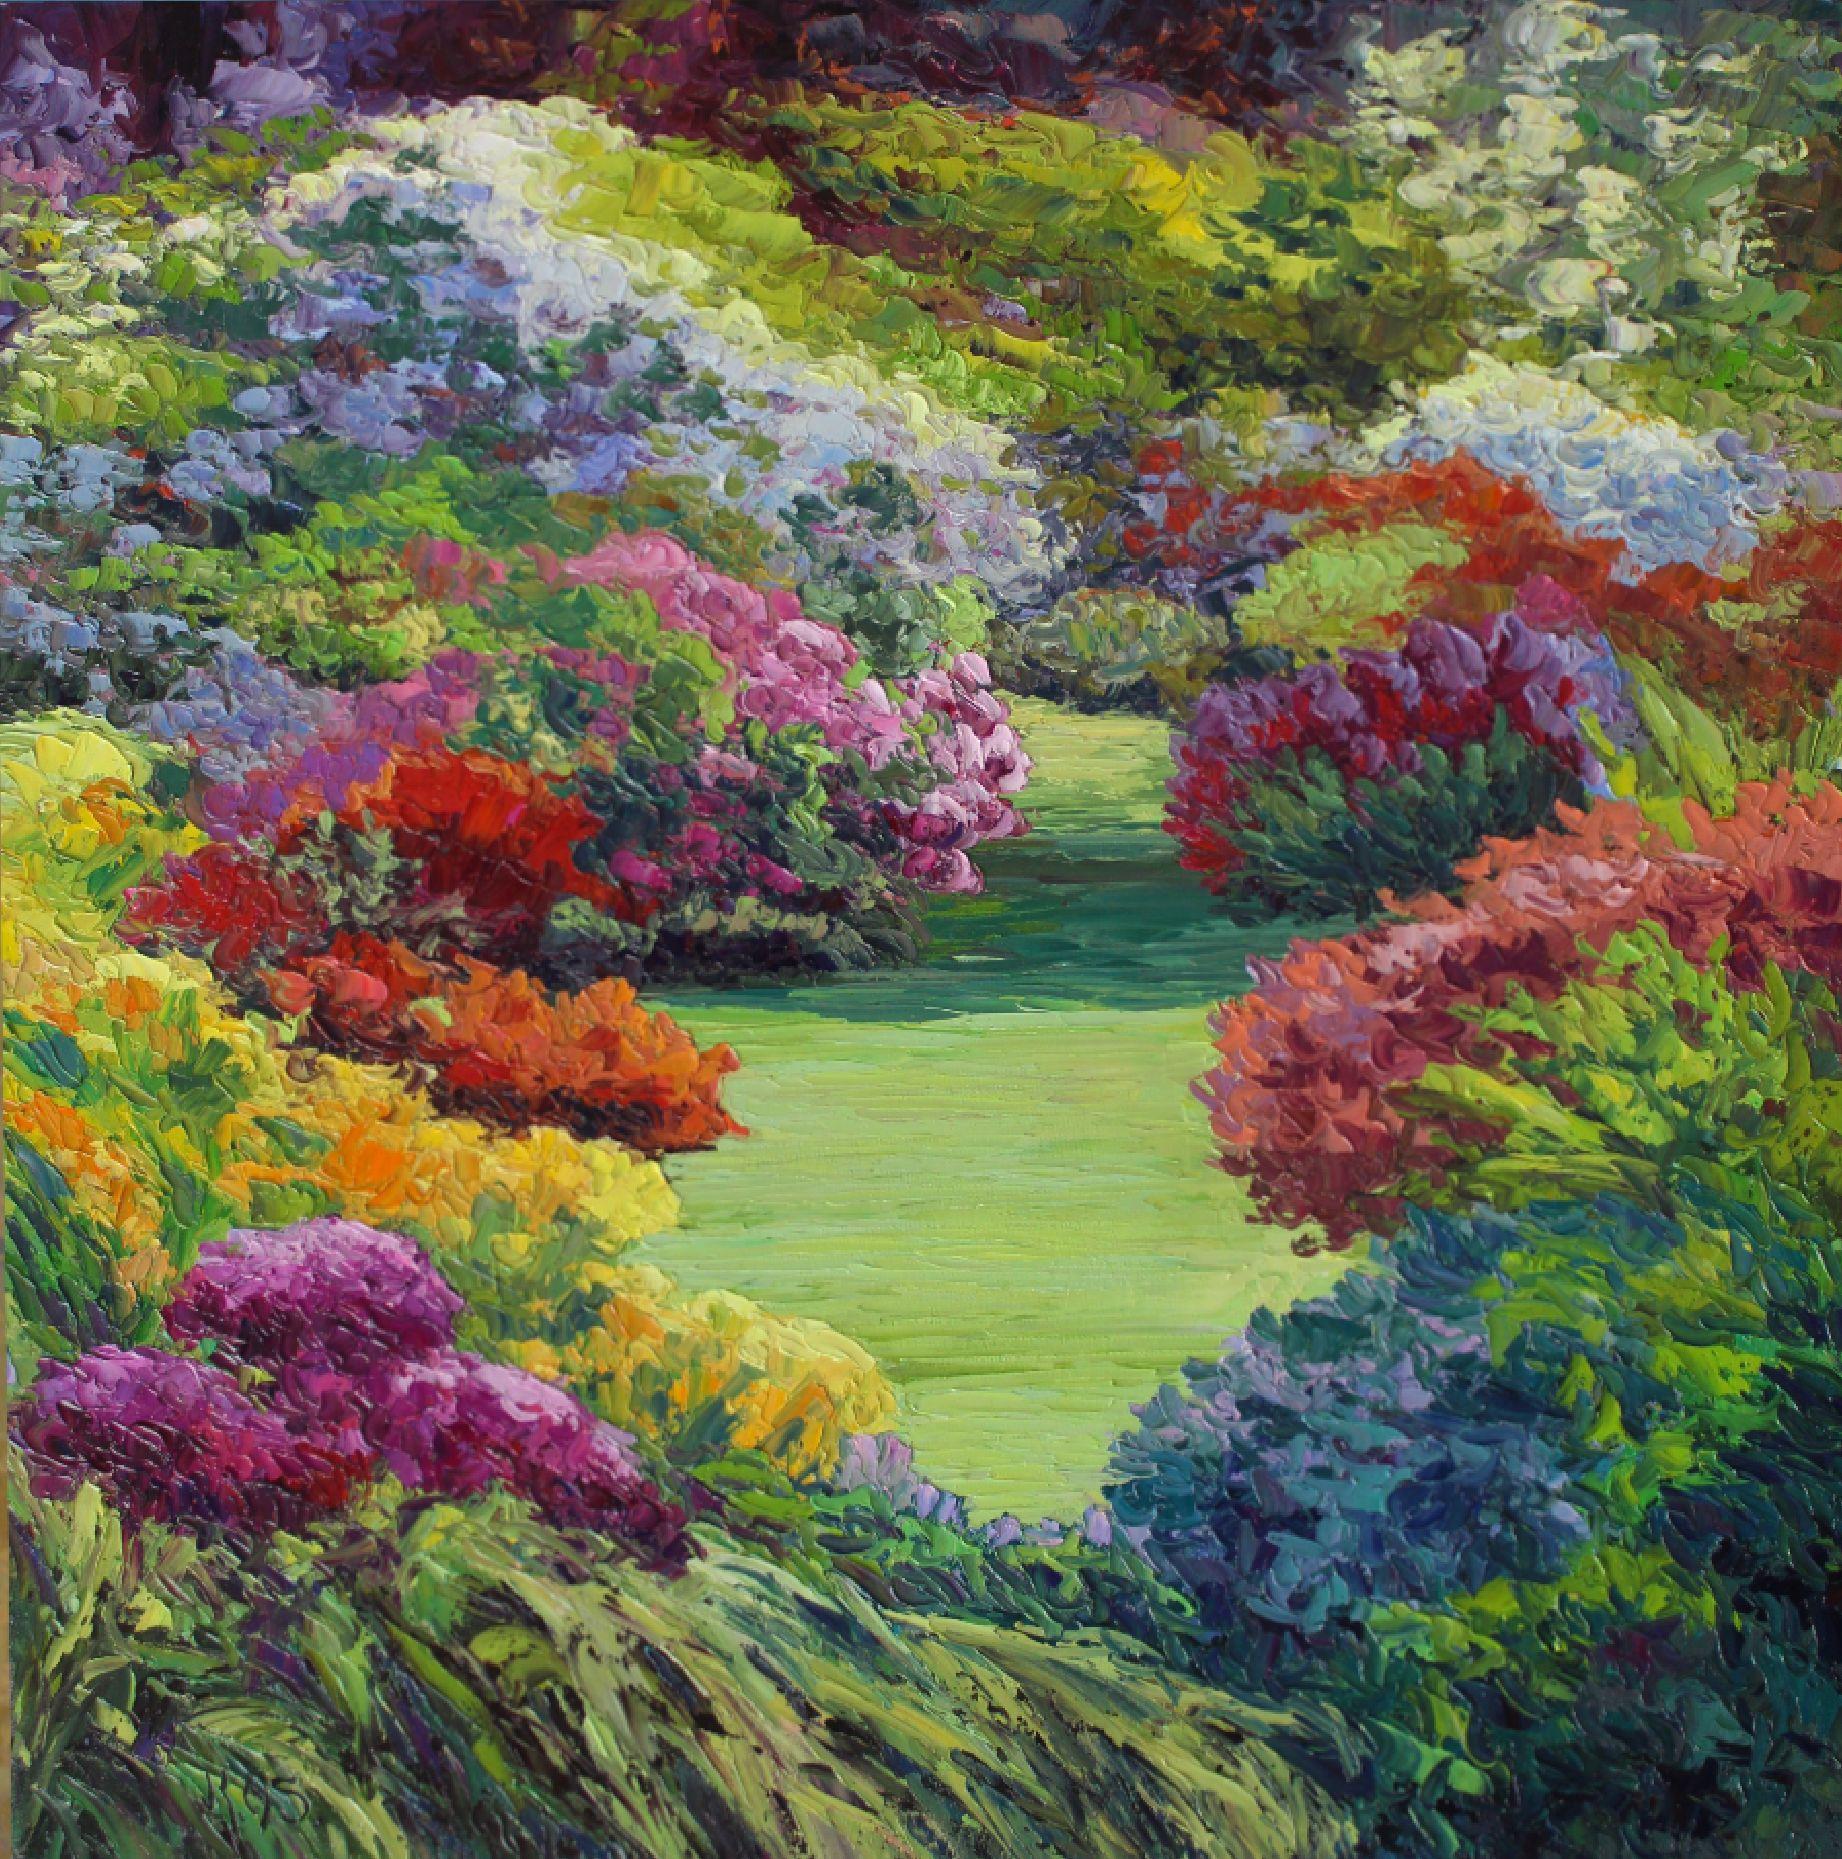 An original contemporary-impressionist garden landscape of gorgeously colored flowers and greenery.  This painting comes with a certificate of authenticity. It has been painted with the highest quality artist oil paints and canvas so you can enjoy